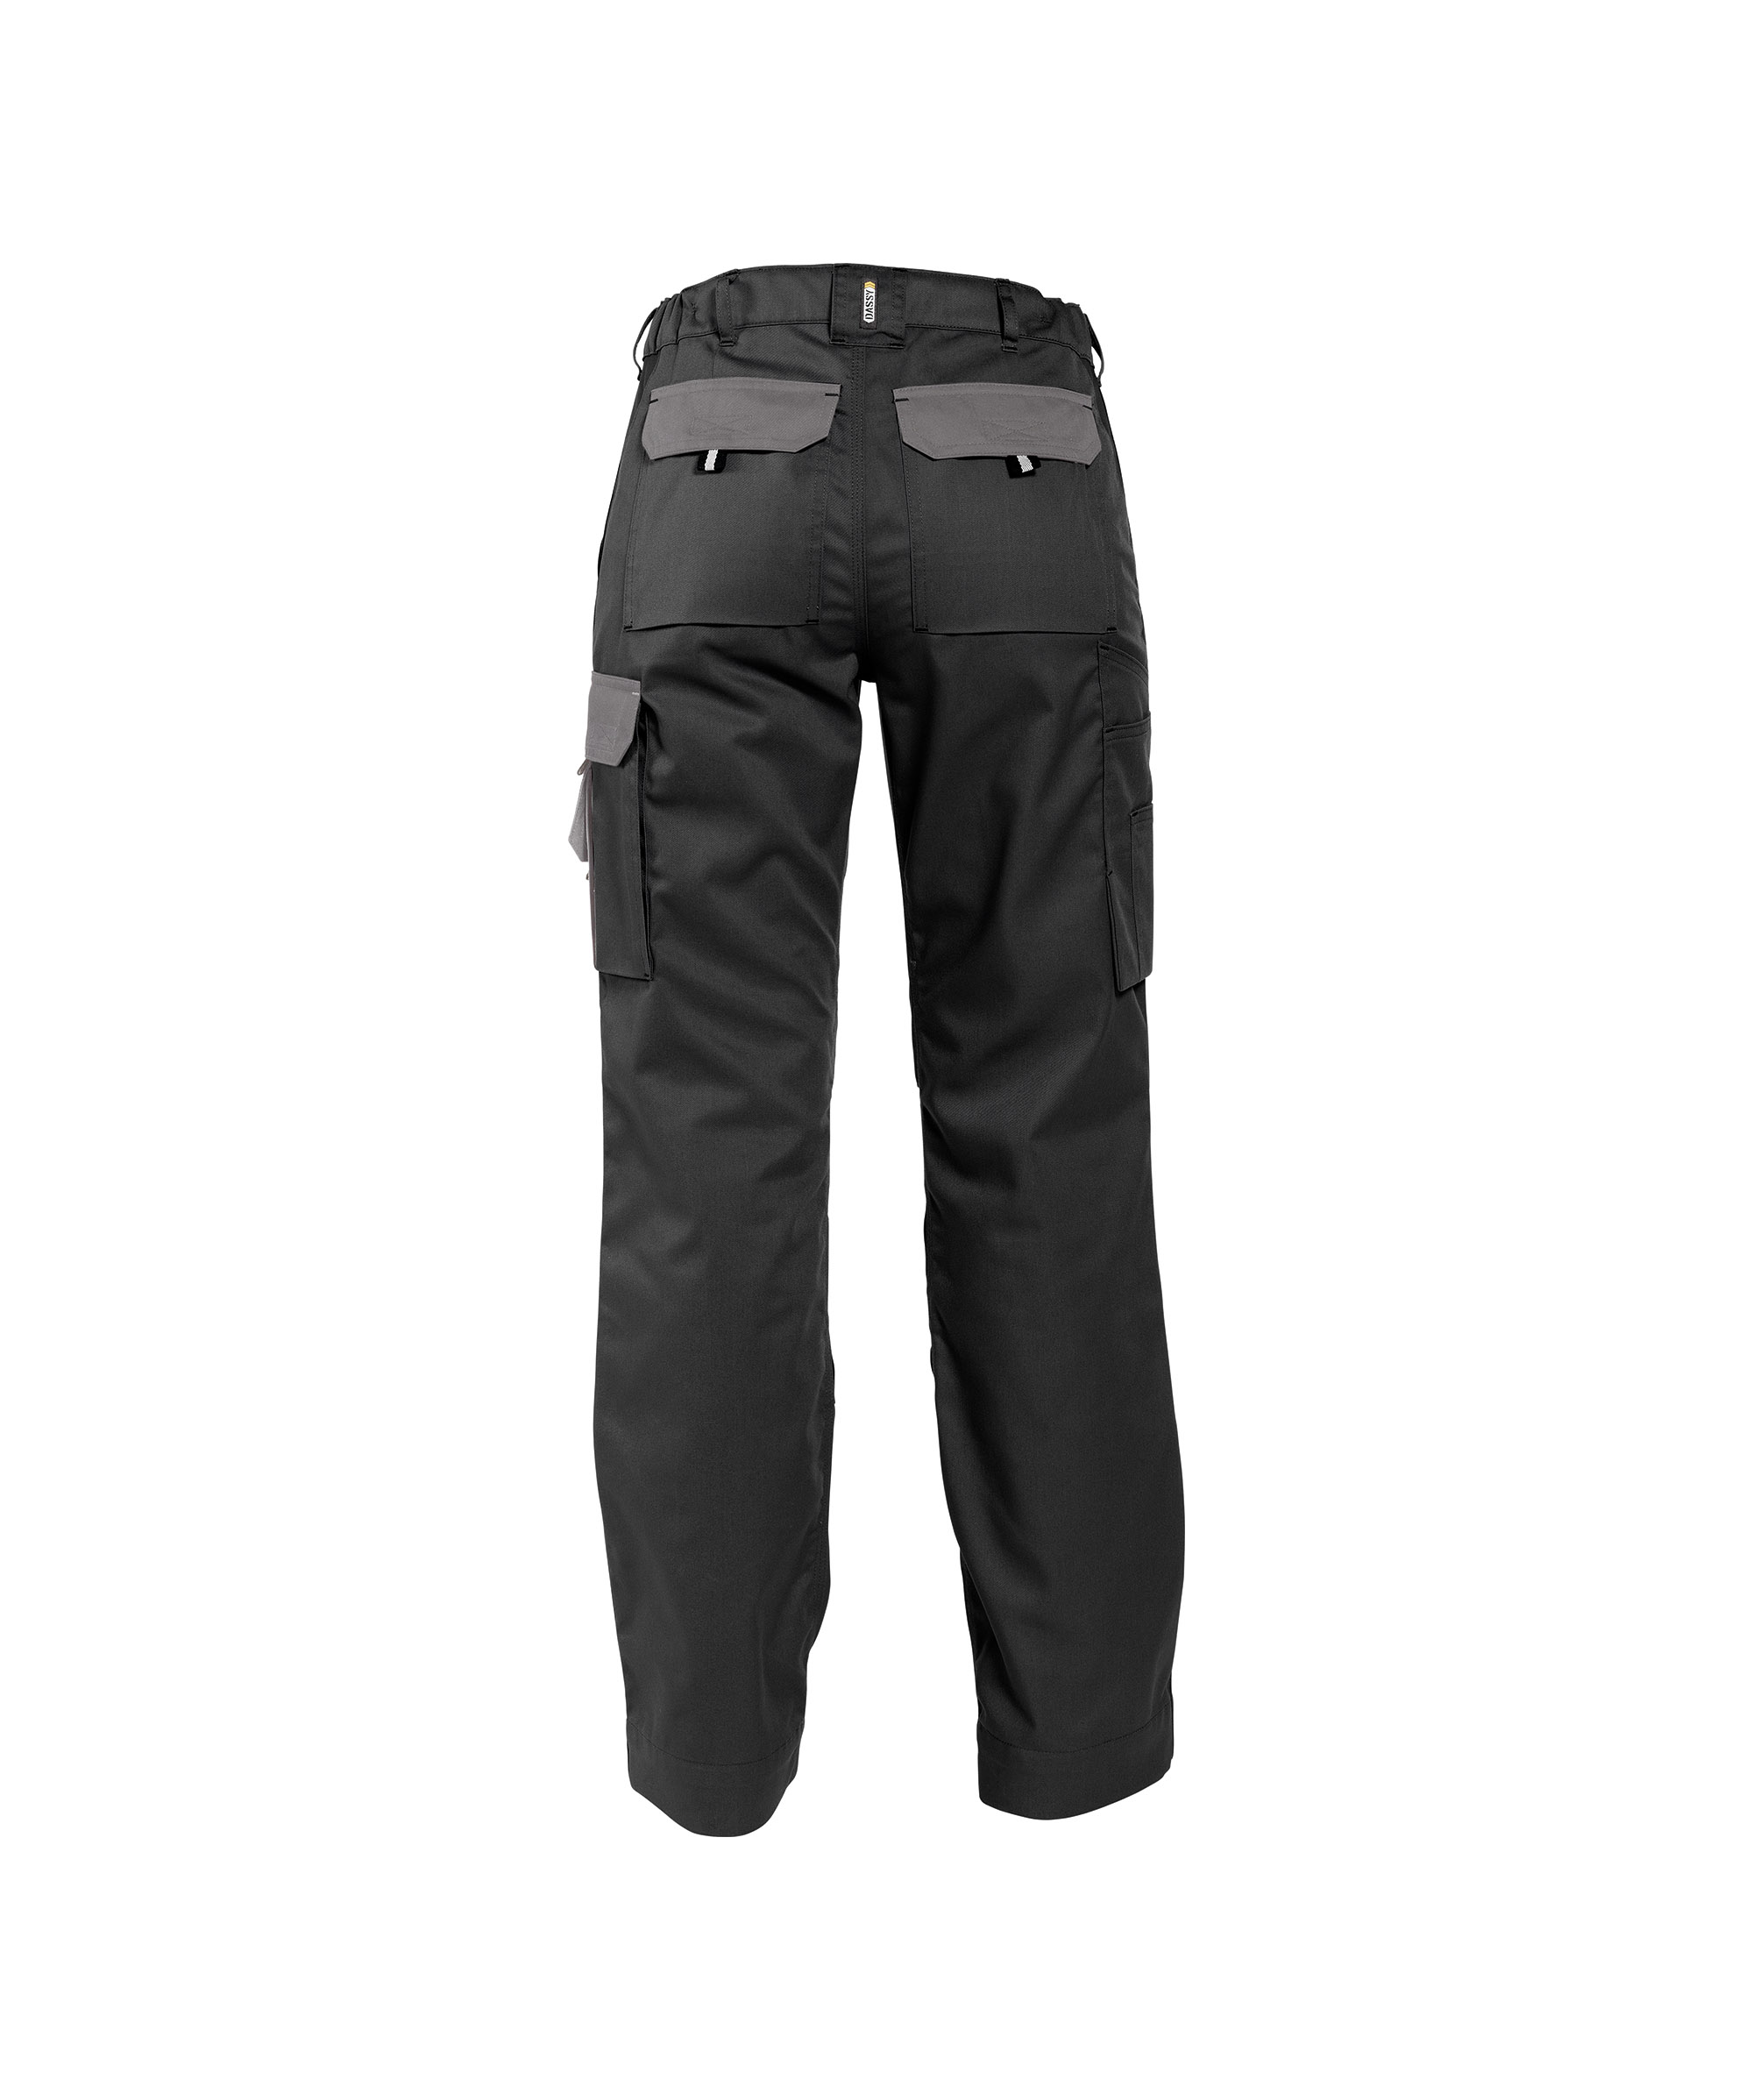 boston-women_two-tone-work-trousers-with-knee-pockets_black-cement-grey_back.jpg